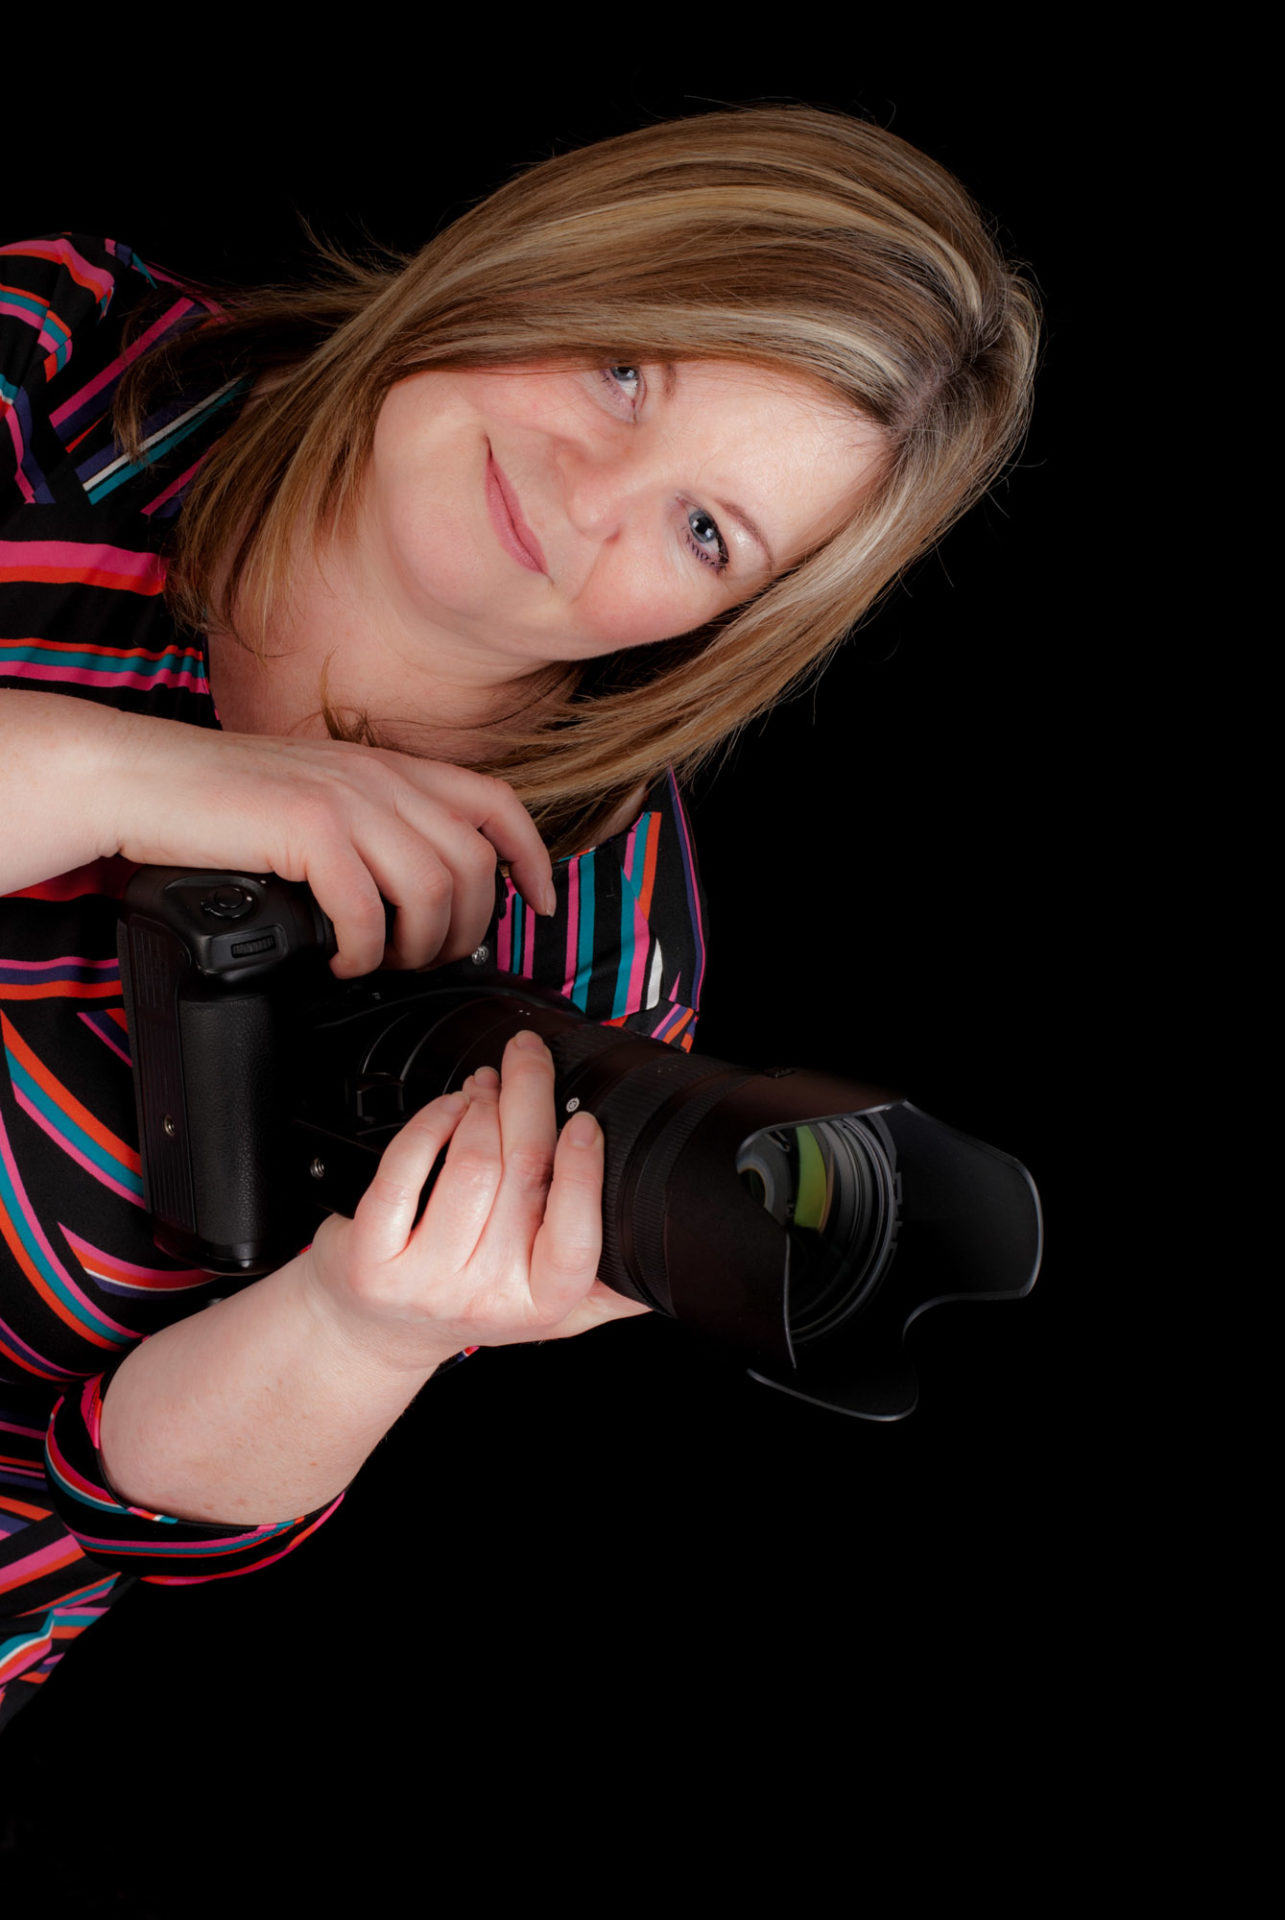 family shoot photographer in Oxfordshire where gift vouchers are available